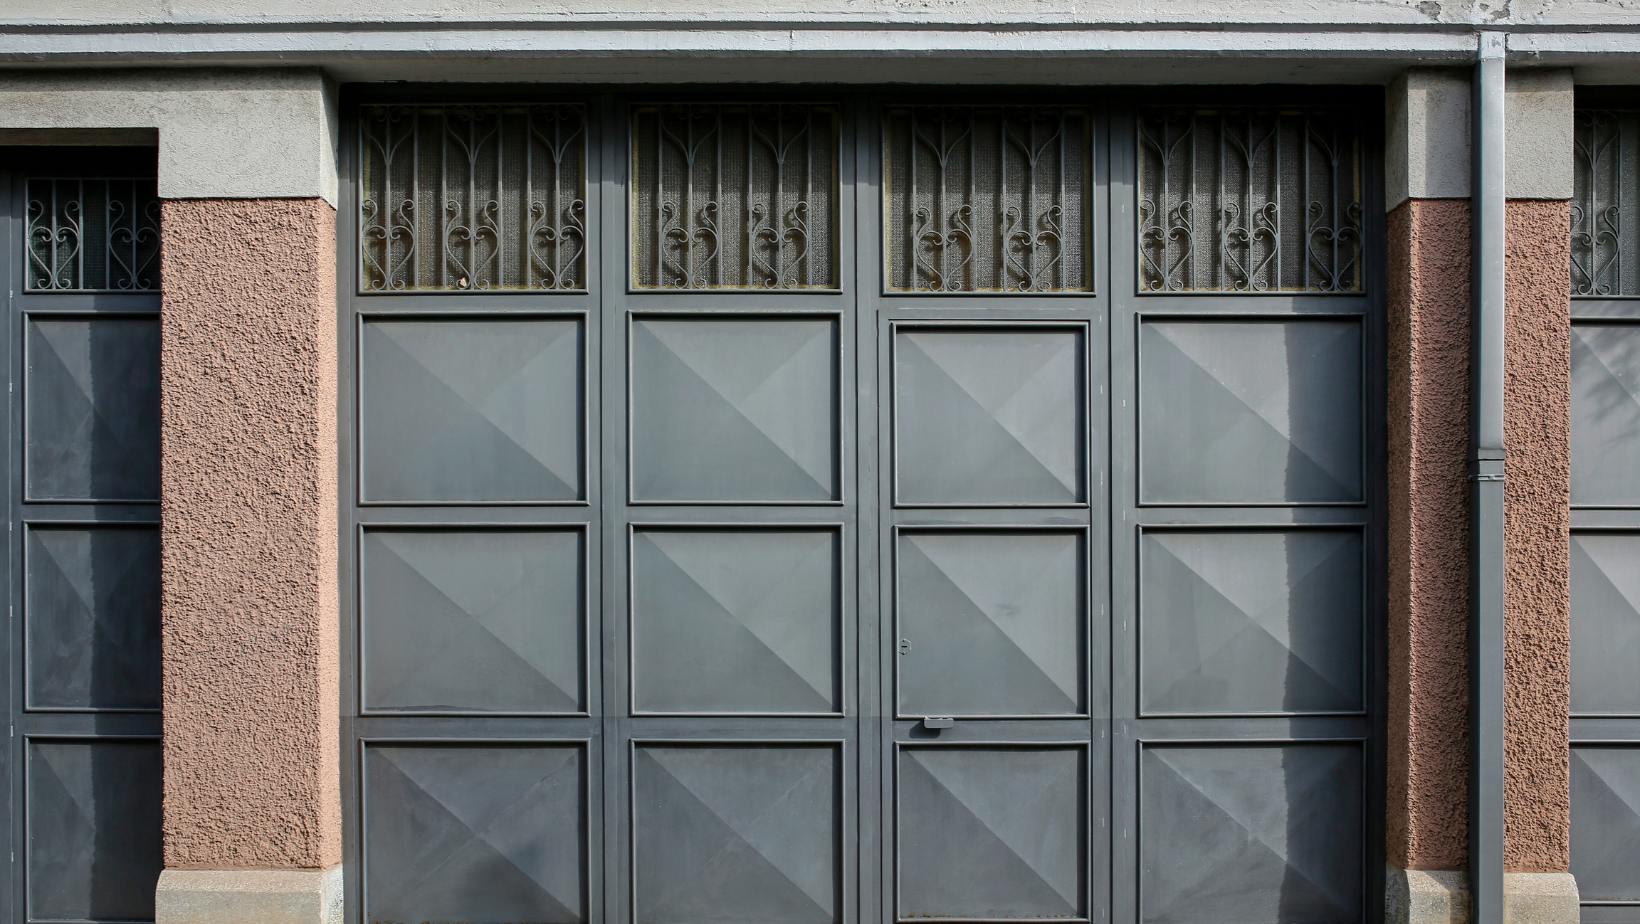 Pro Tips For Buying The Best Garage Doors According To Your Needs